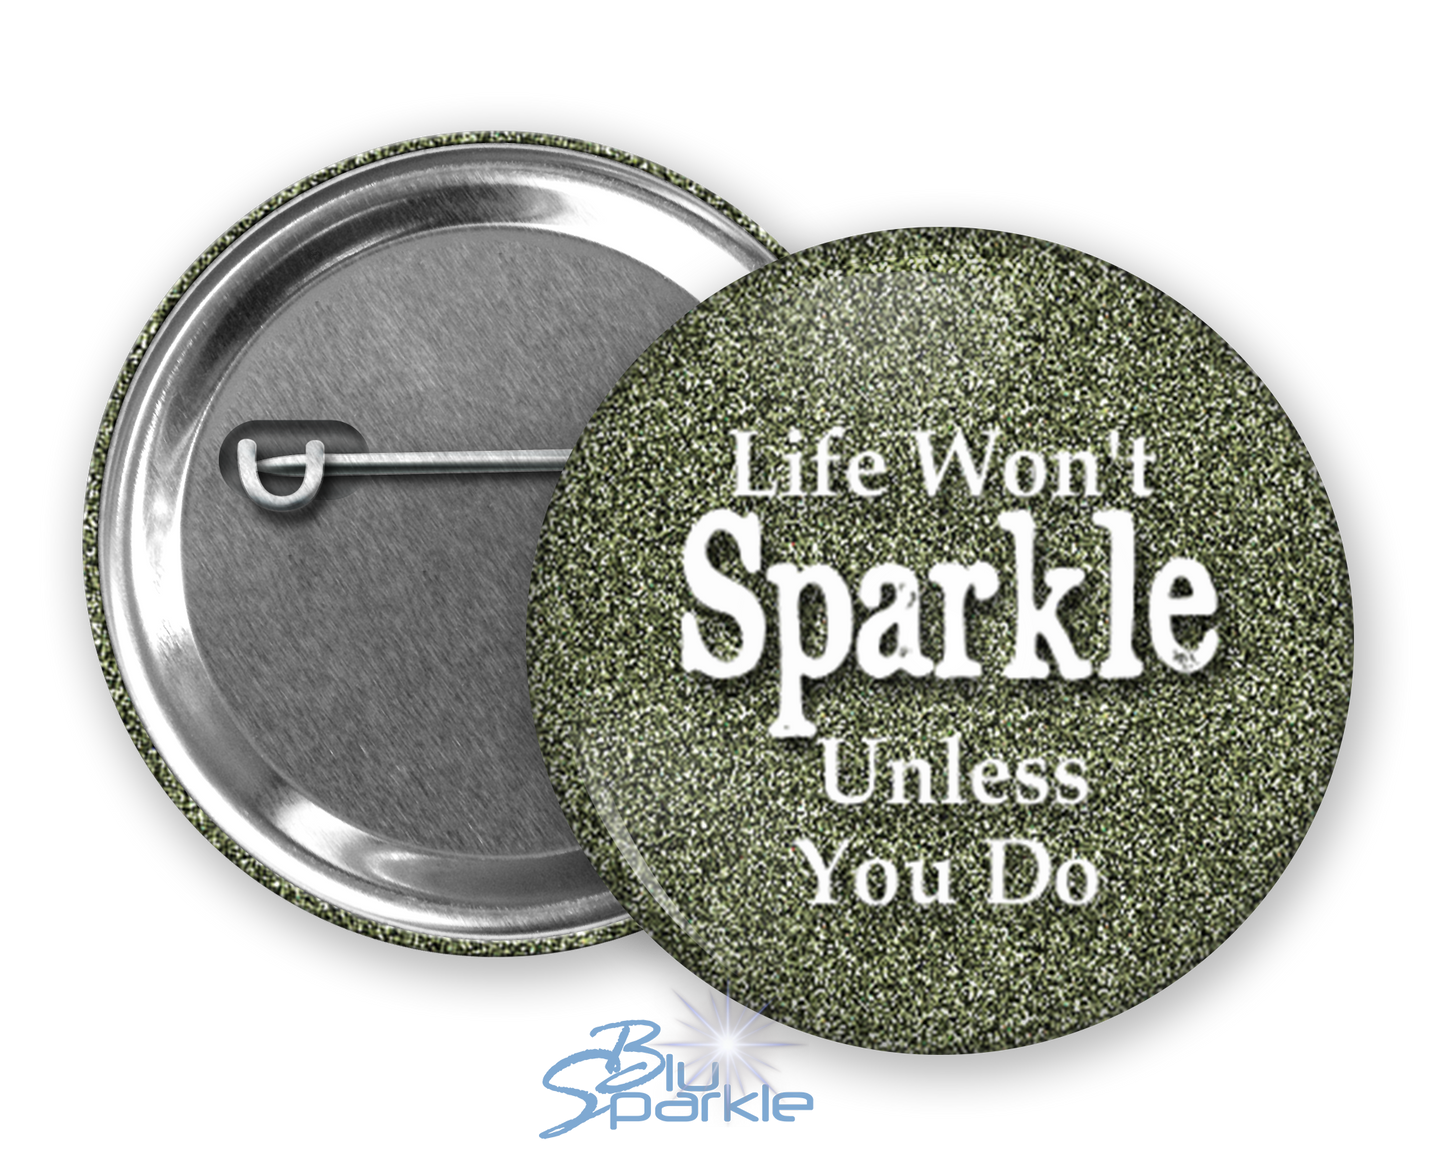 Life Won't Sparkle Unless You Do - Pinback Buttons